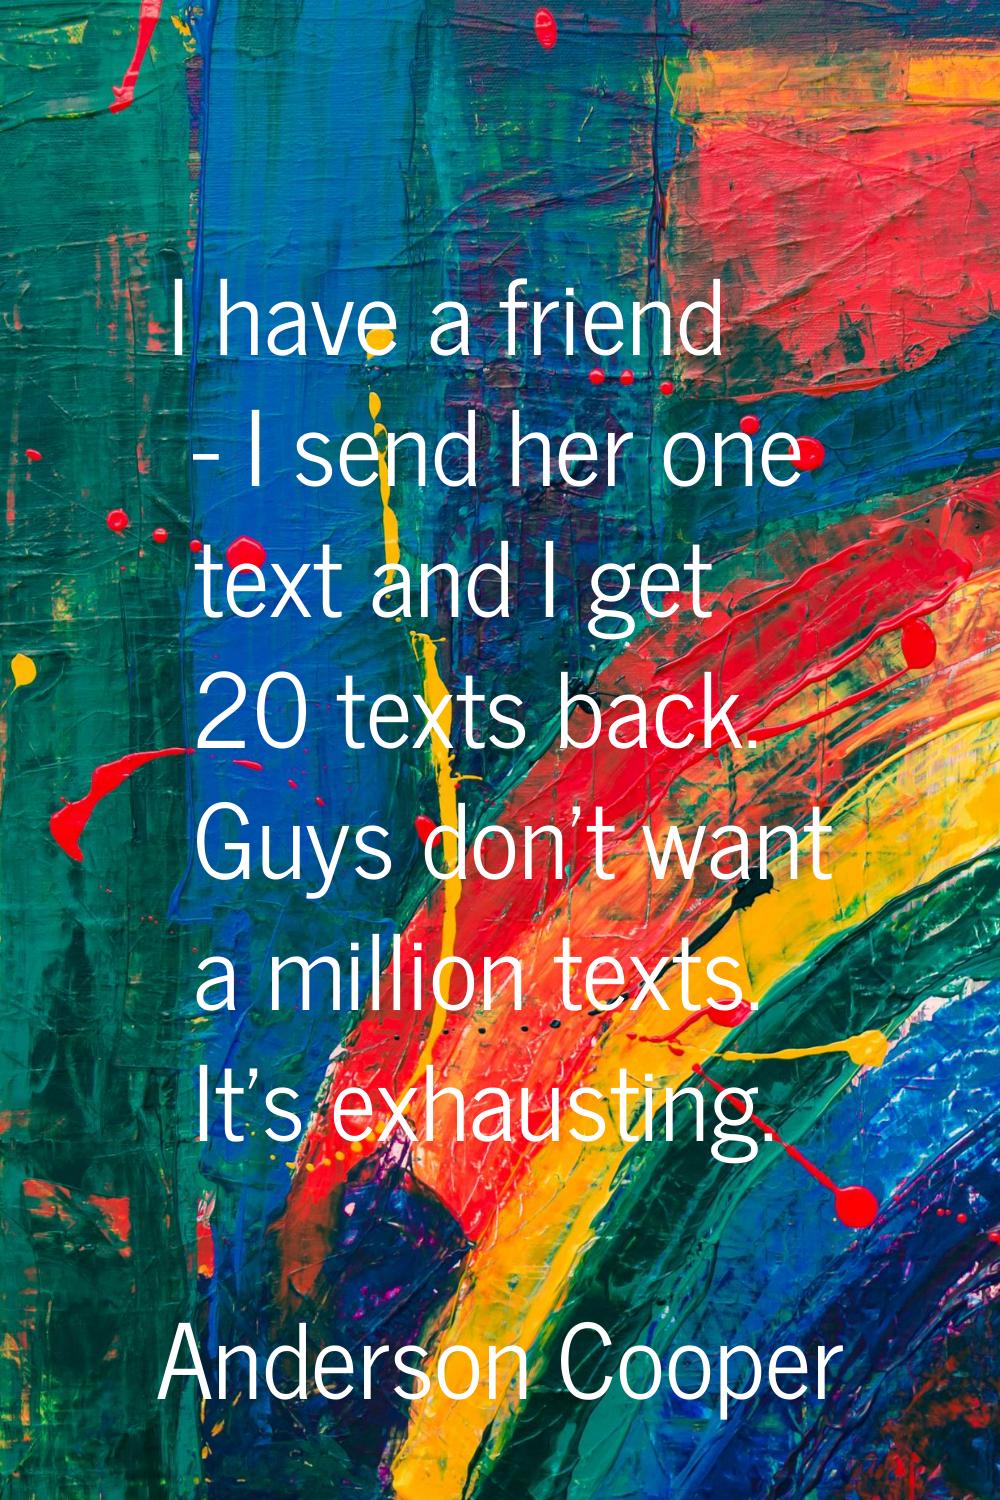 I have a friend - I send her one text and I get 20 texts back. Guys don't want a million texts. It'